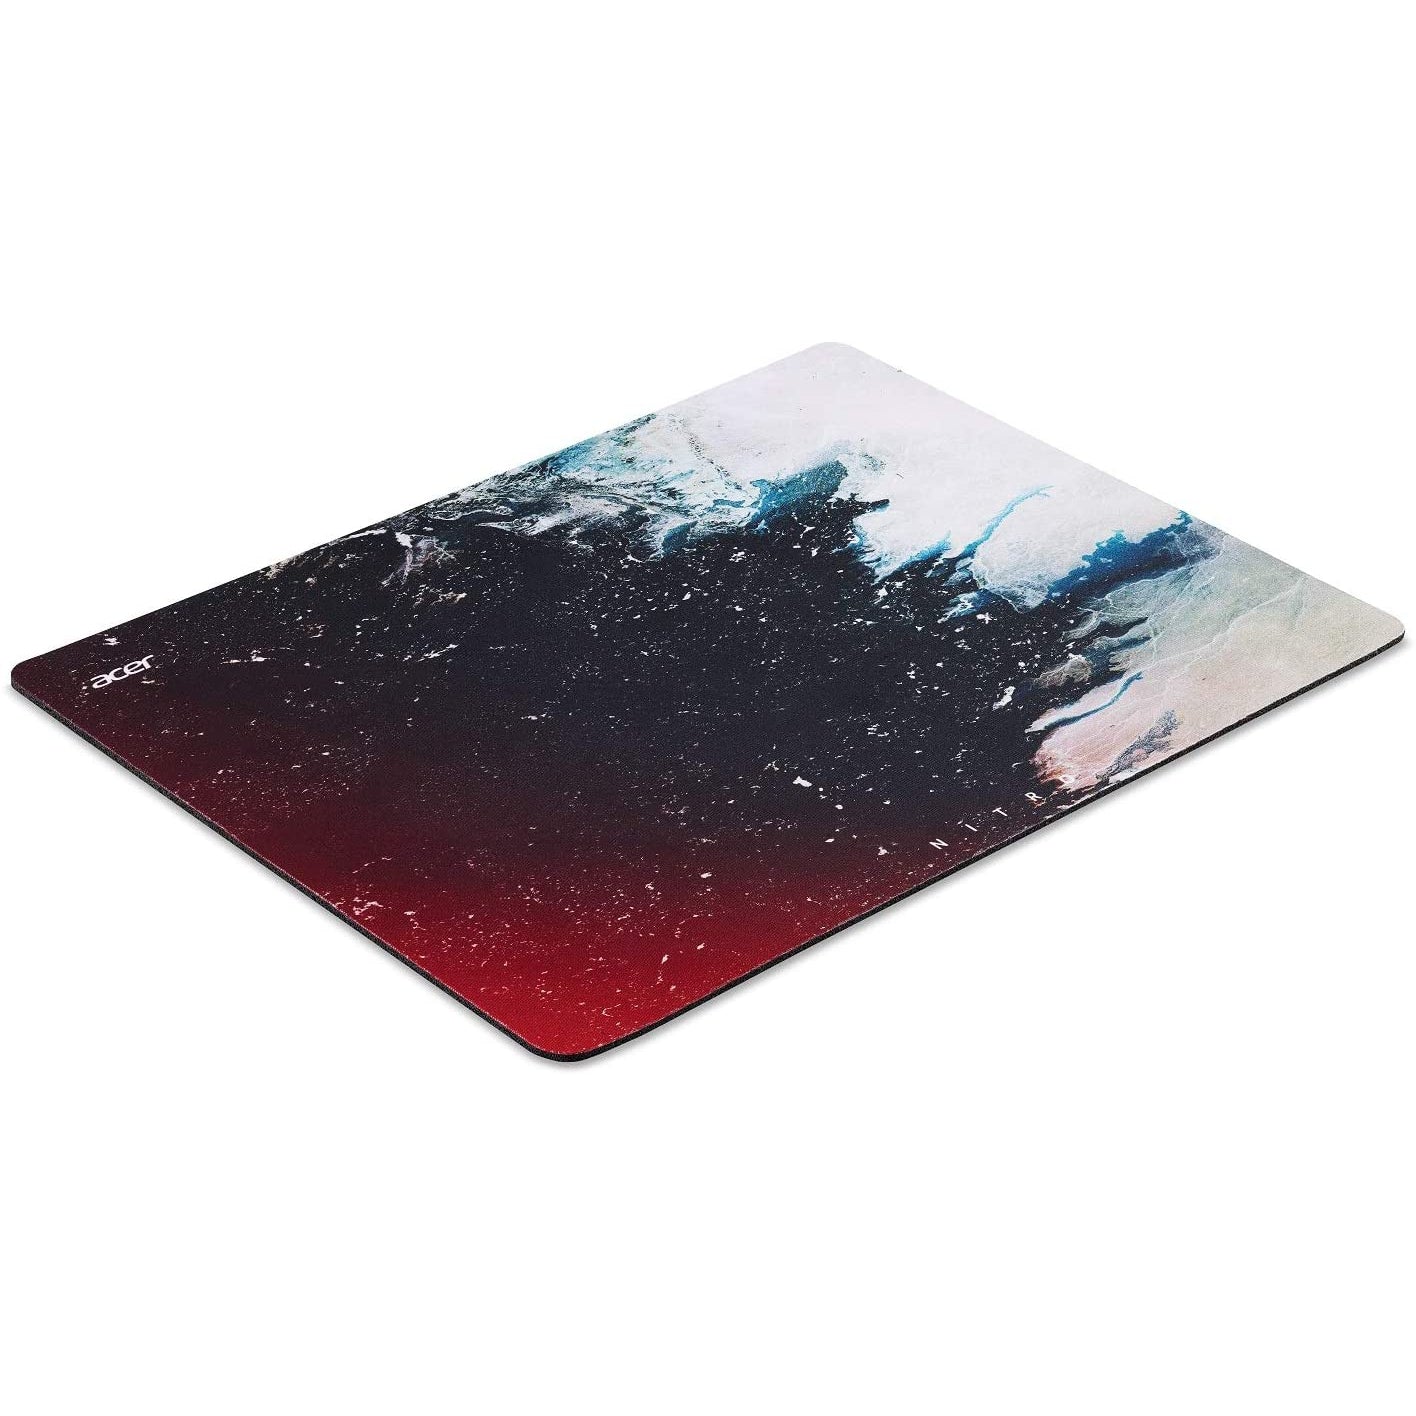 Acer Nitro Mousepad, Durable design to offer precision tracking and excellent control (NMP810)